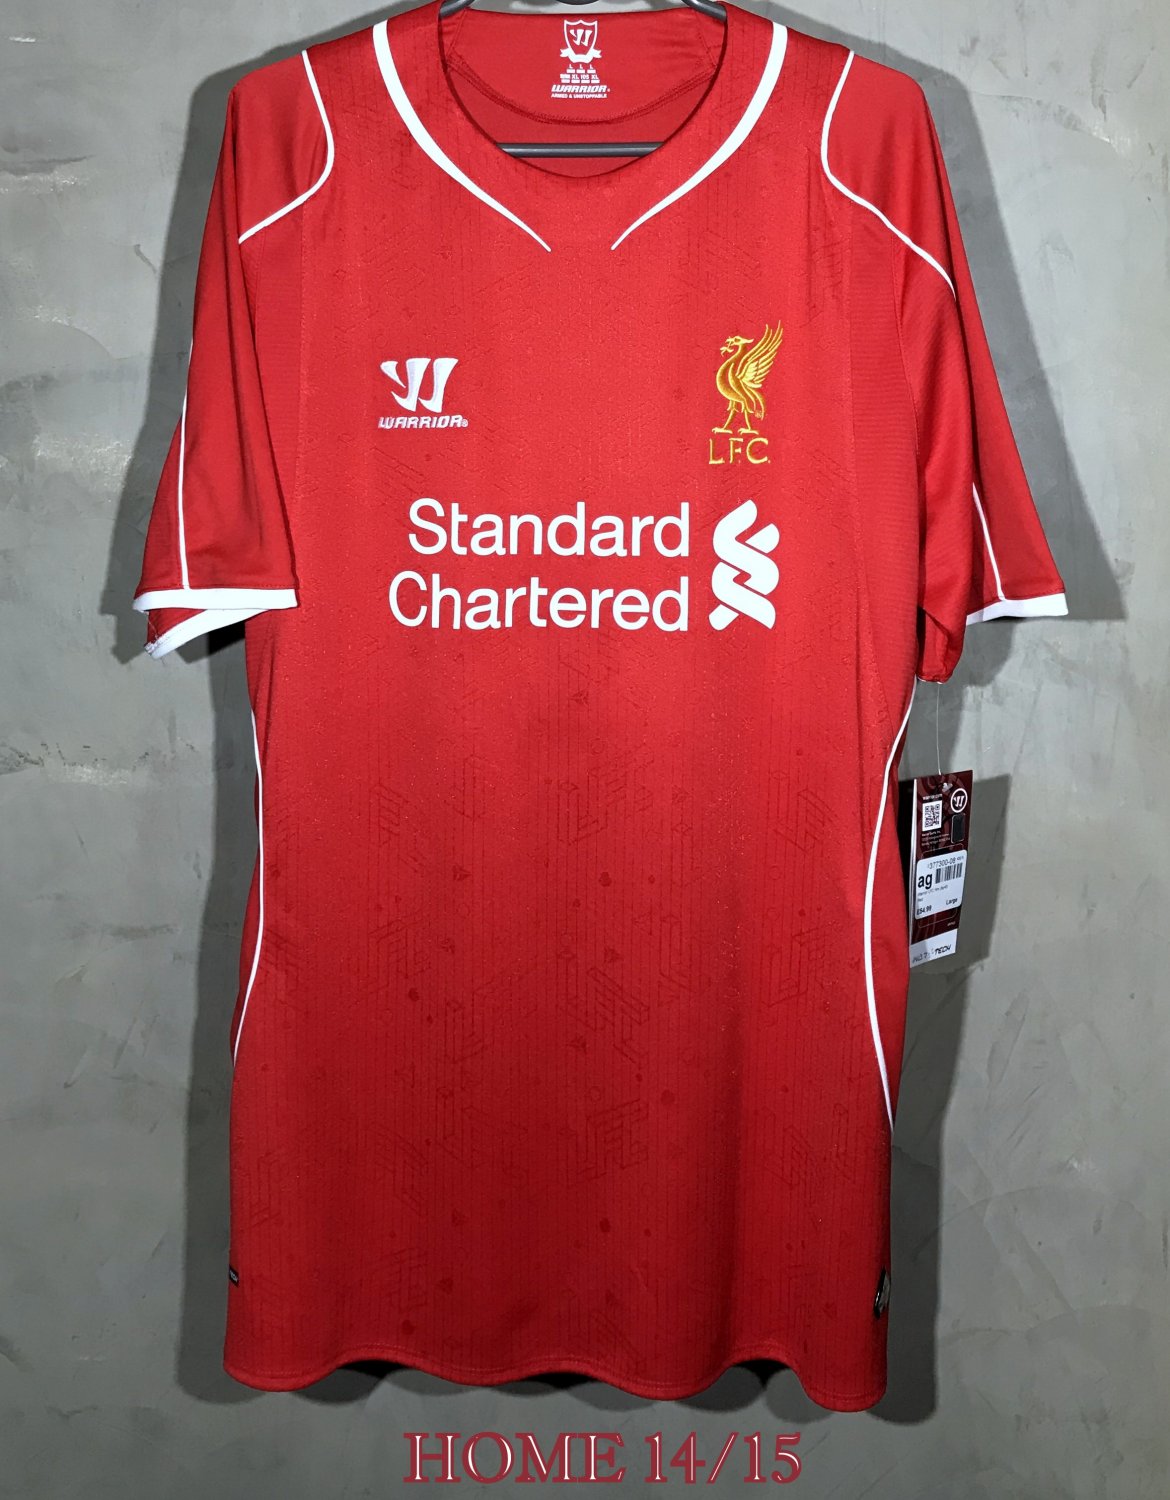 Liverpool Home football shirt 2014 - 2015. Sponsored by Standard Chartered